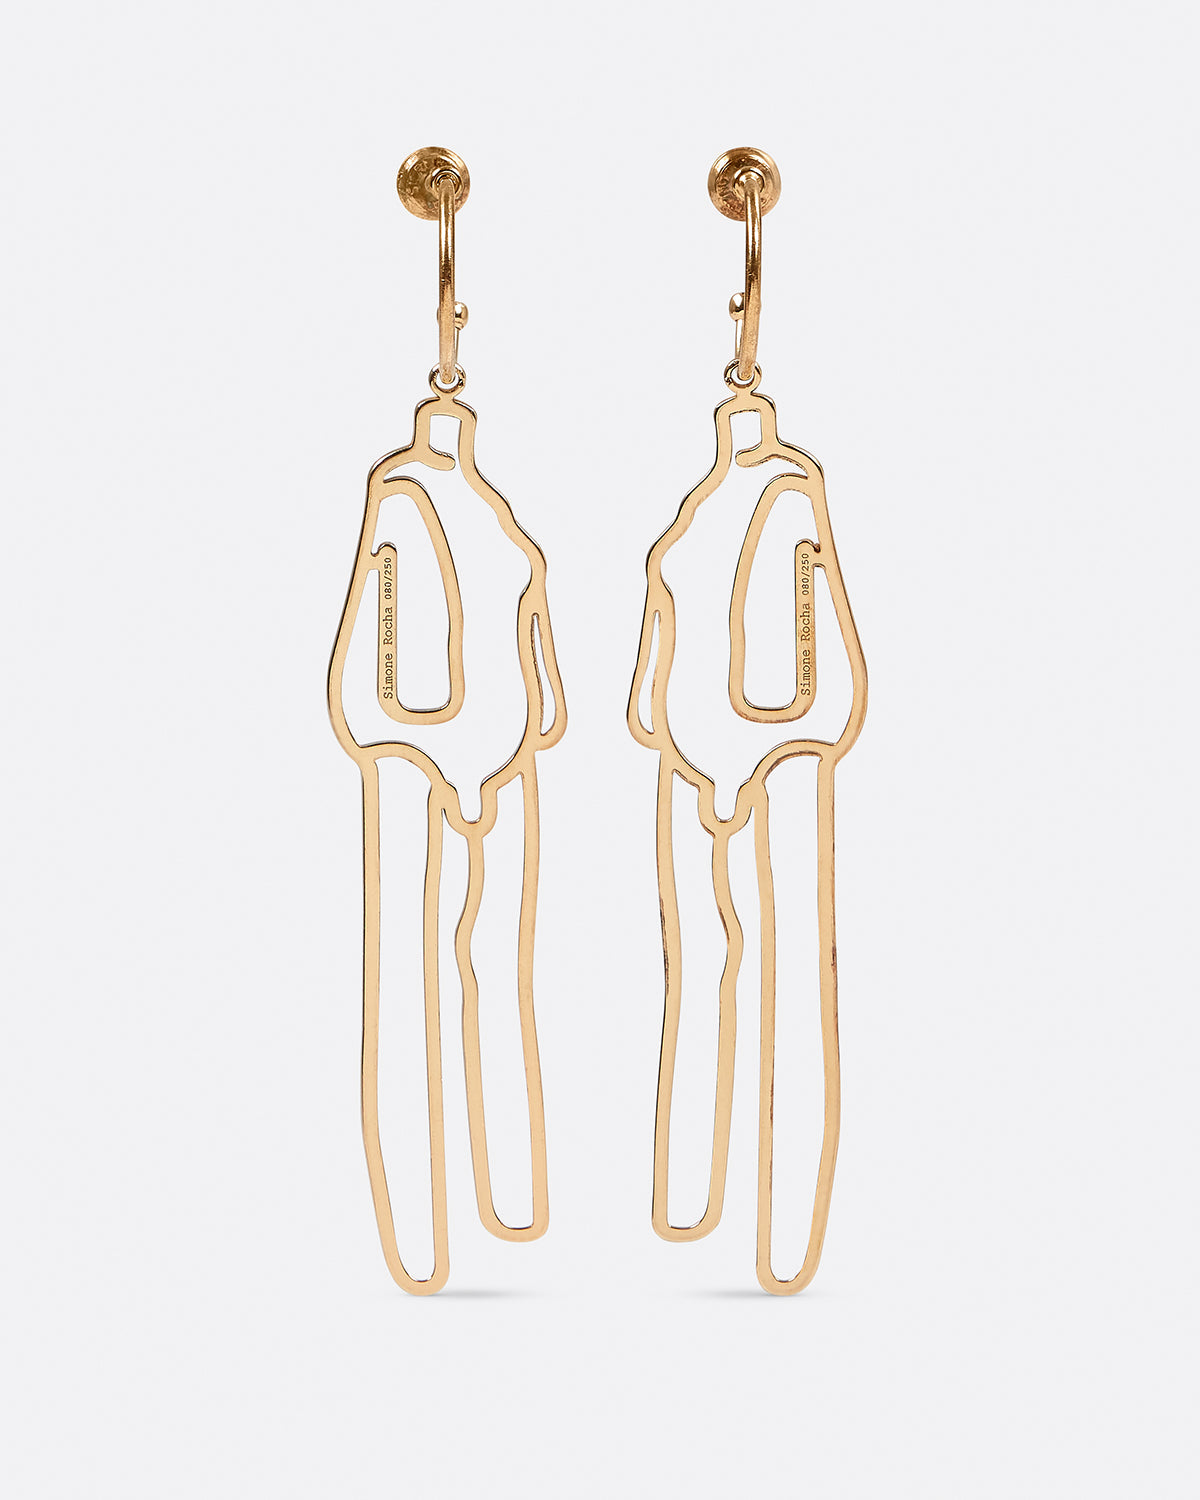 Louise Bourgeois 'Untitled' Earrings Edition